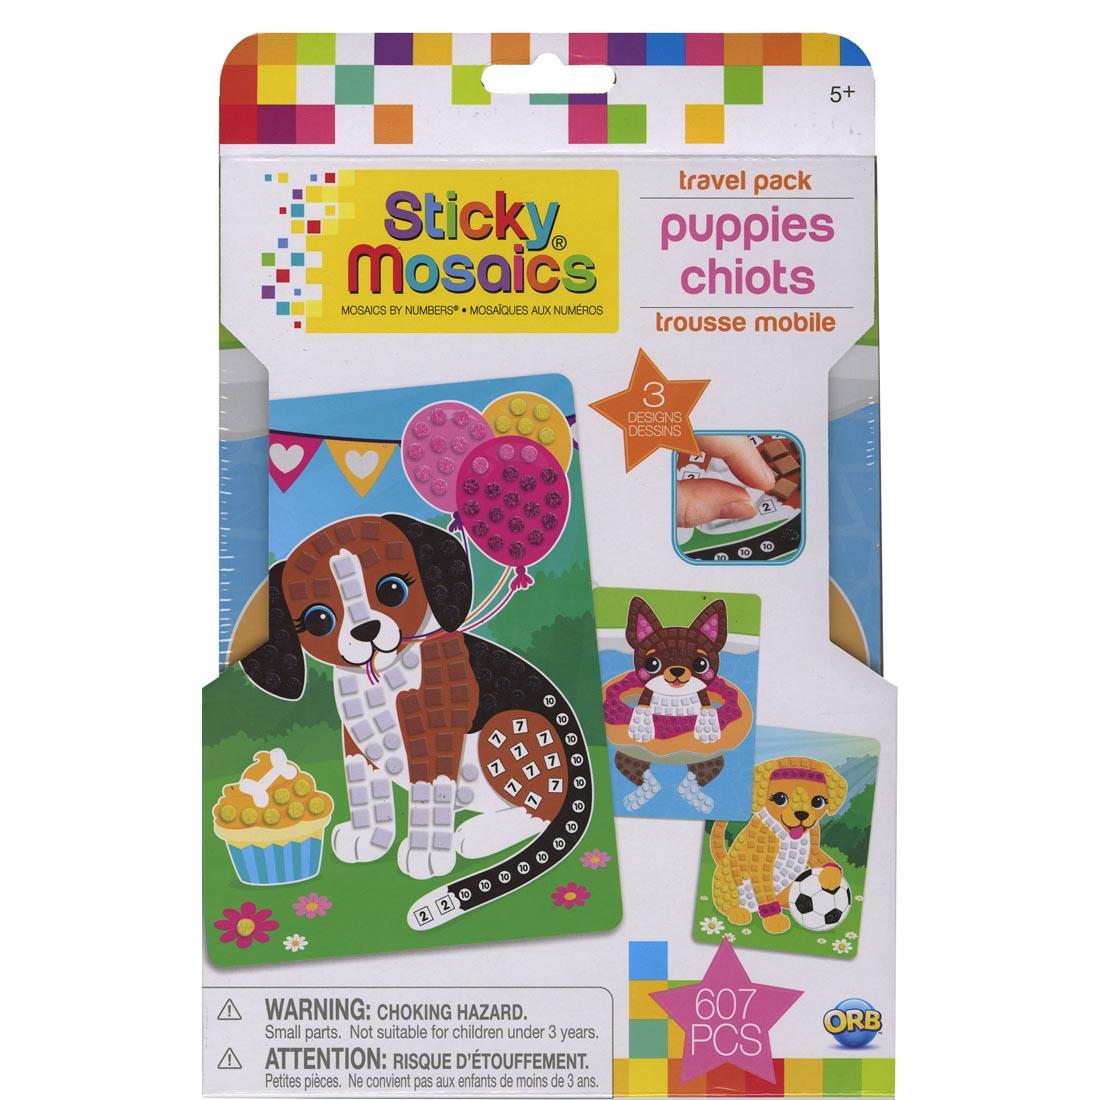 box of adhesive-backed foam mosaic crafts, featuring 3 different puppy designs